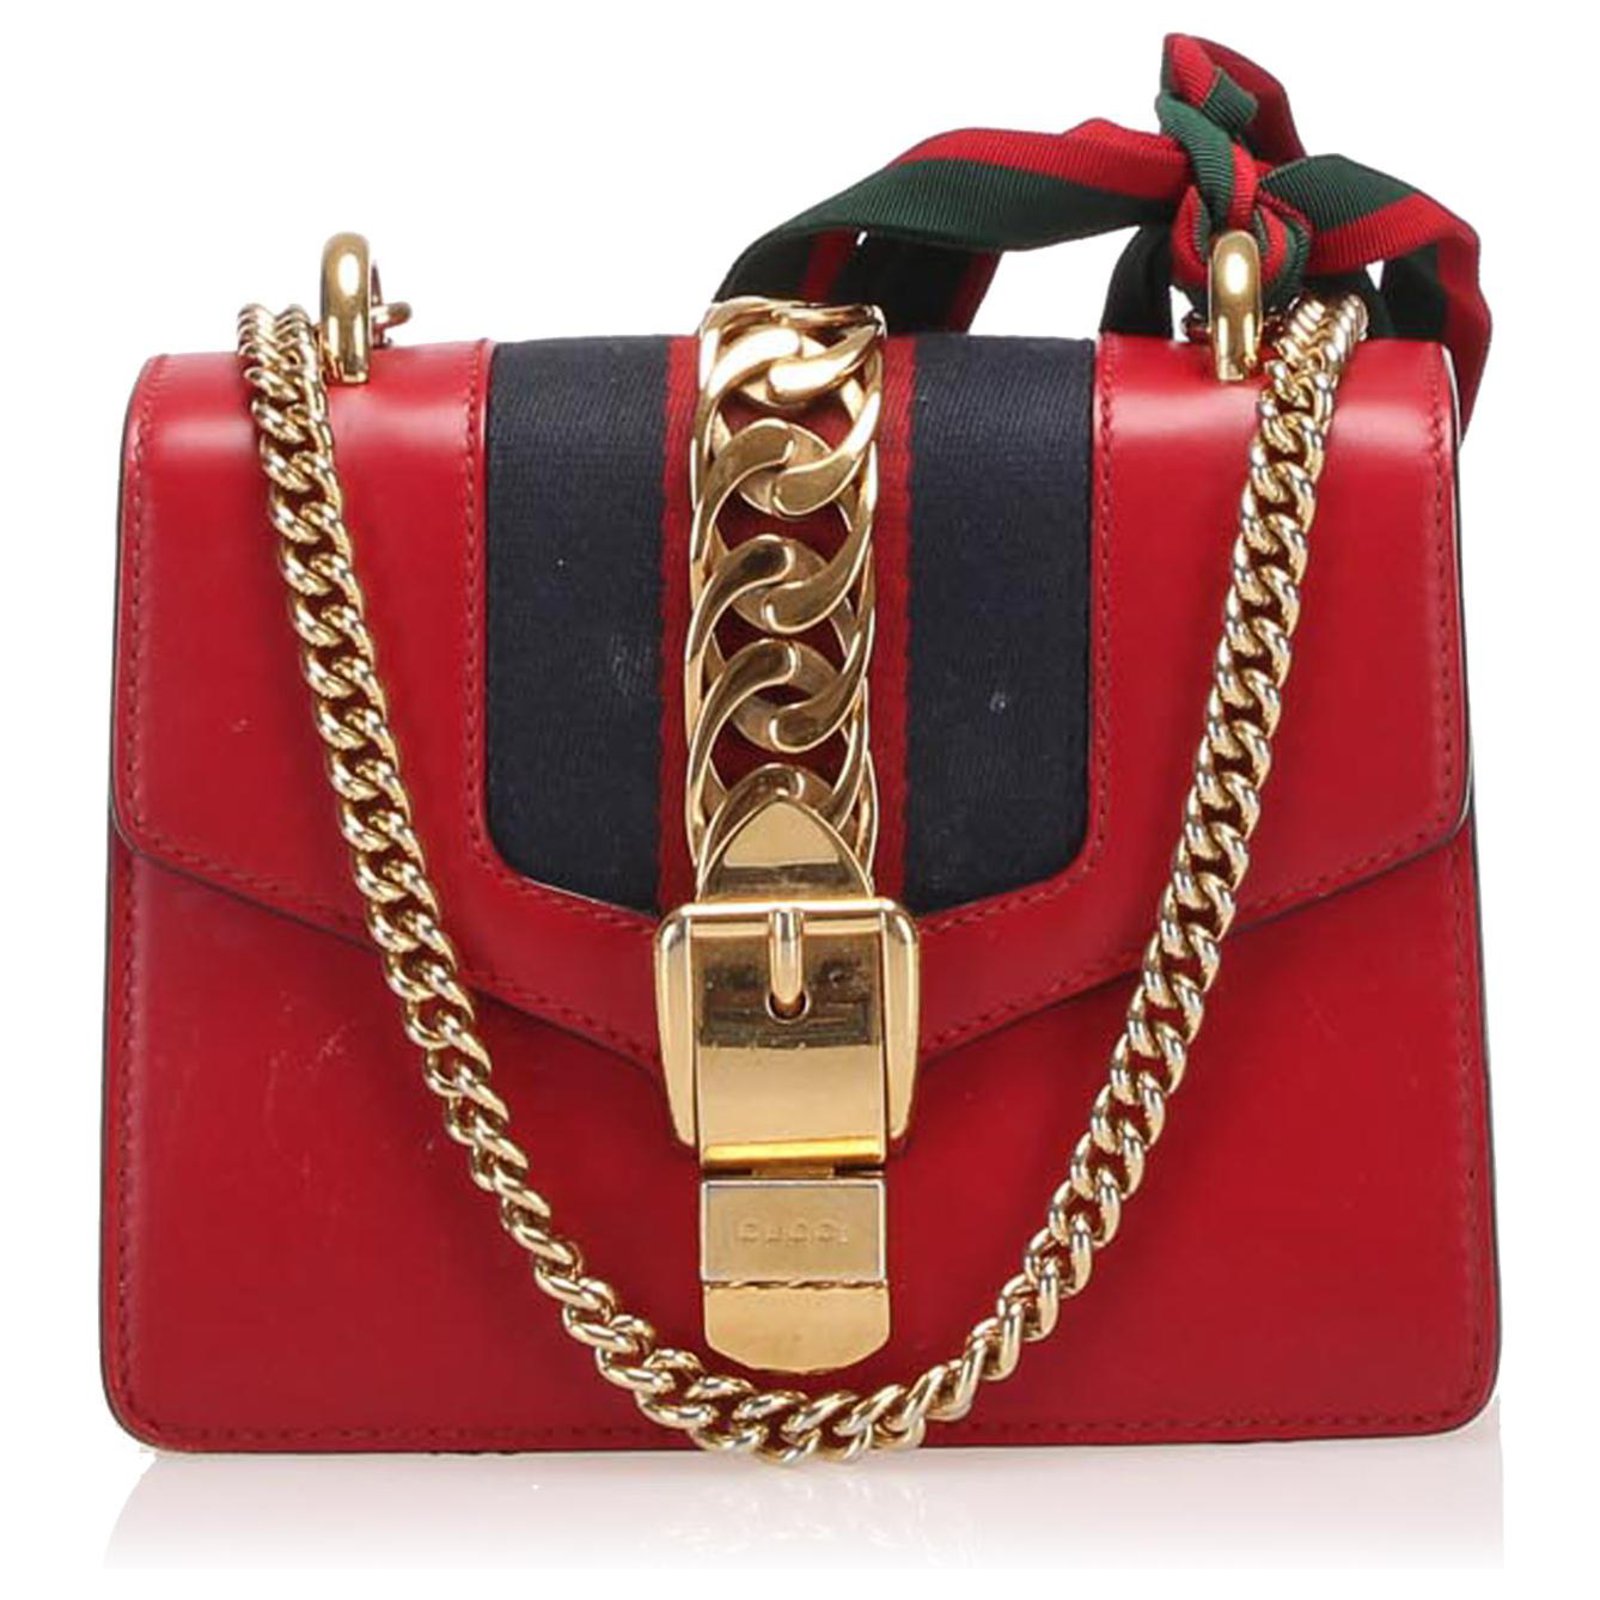 gucci bag with metal strap